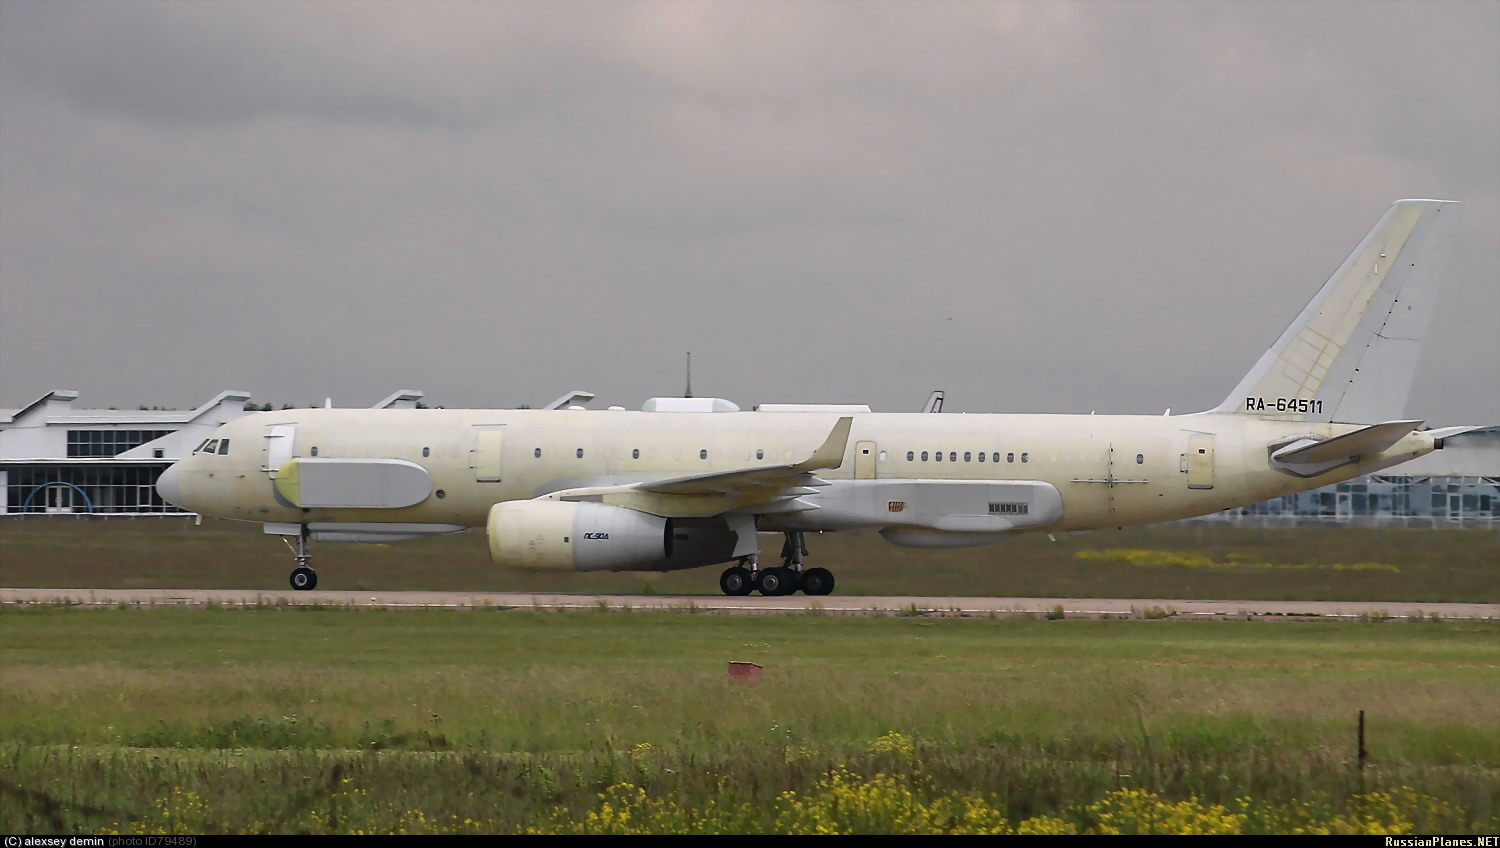 Armée Russe / Armed Forces of the Russian Federation - Page 23 TU-214R+RA-64511+ZHUKOVSKII+08-06-2012